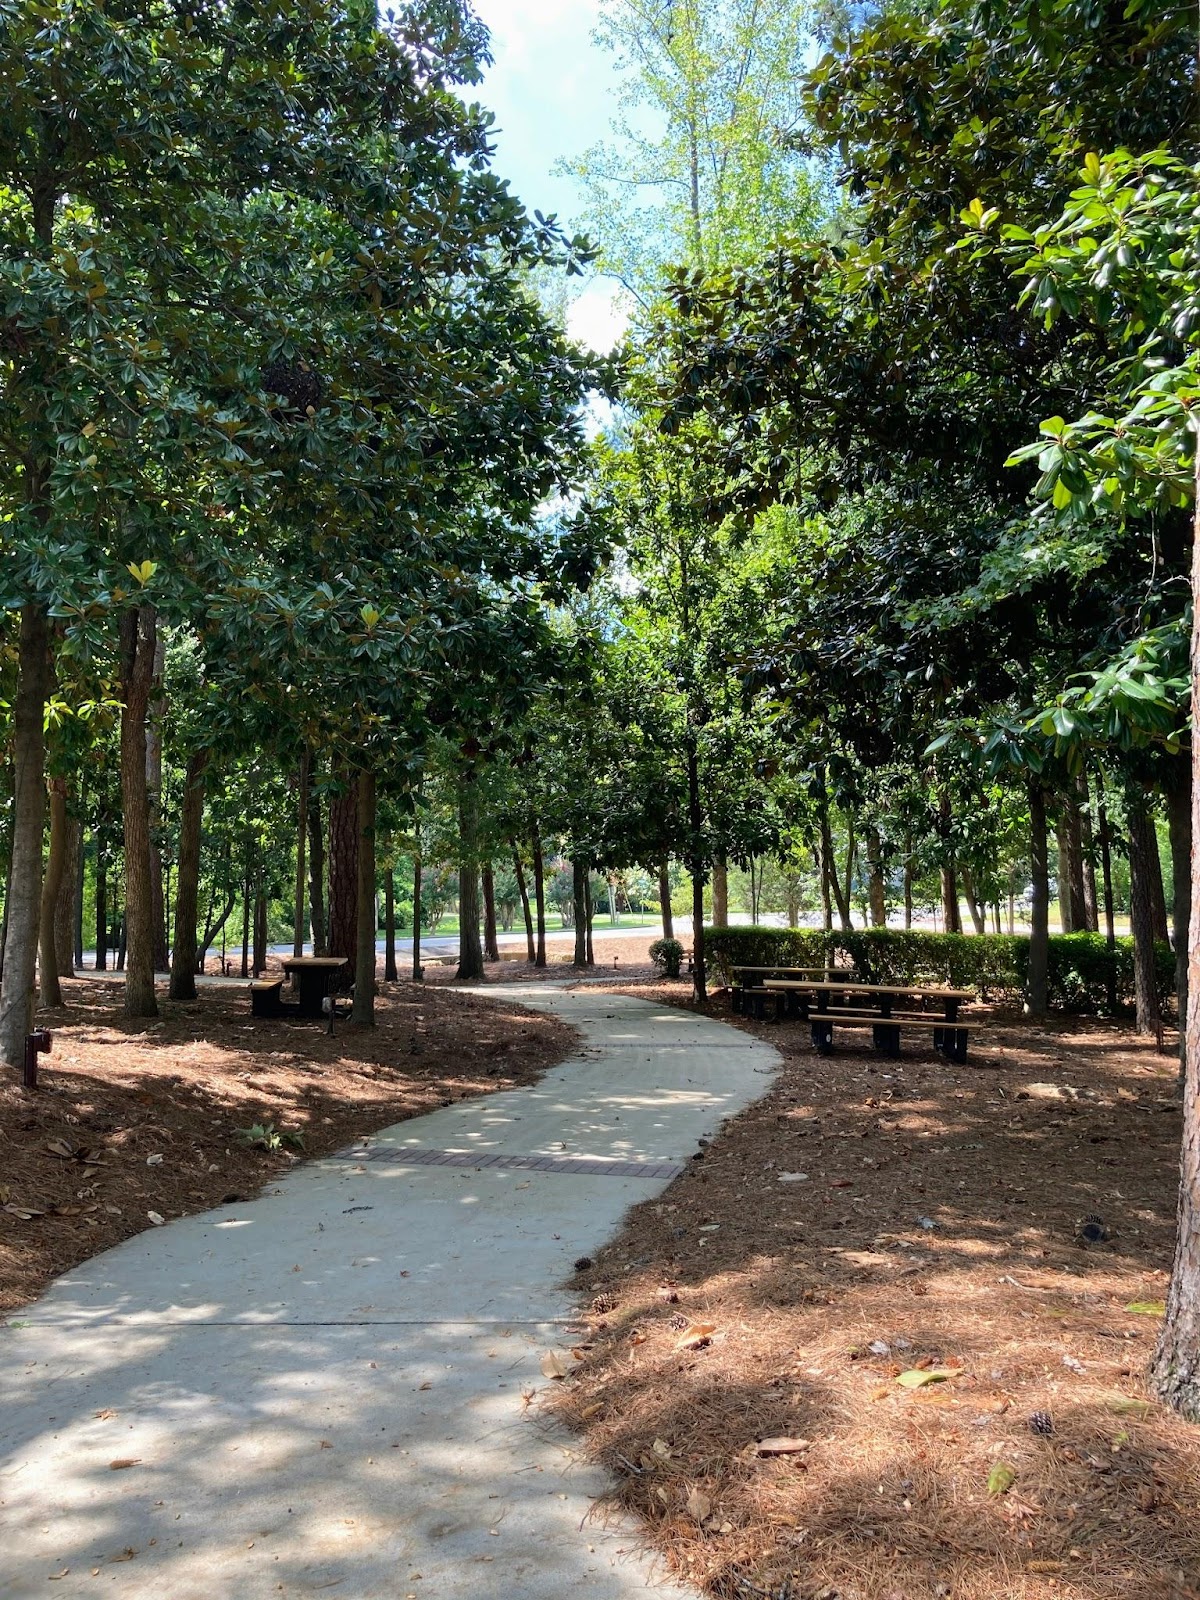 Residents living in Fuquay have access to many parks and greenways.